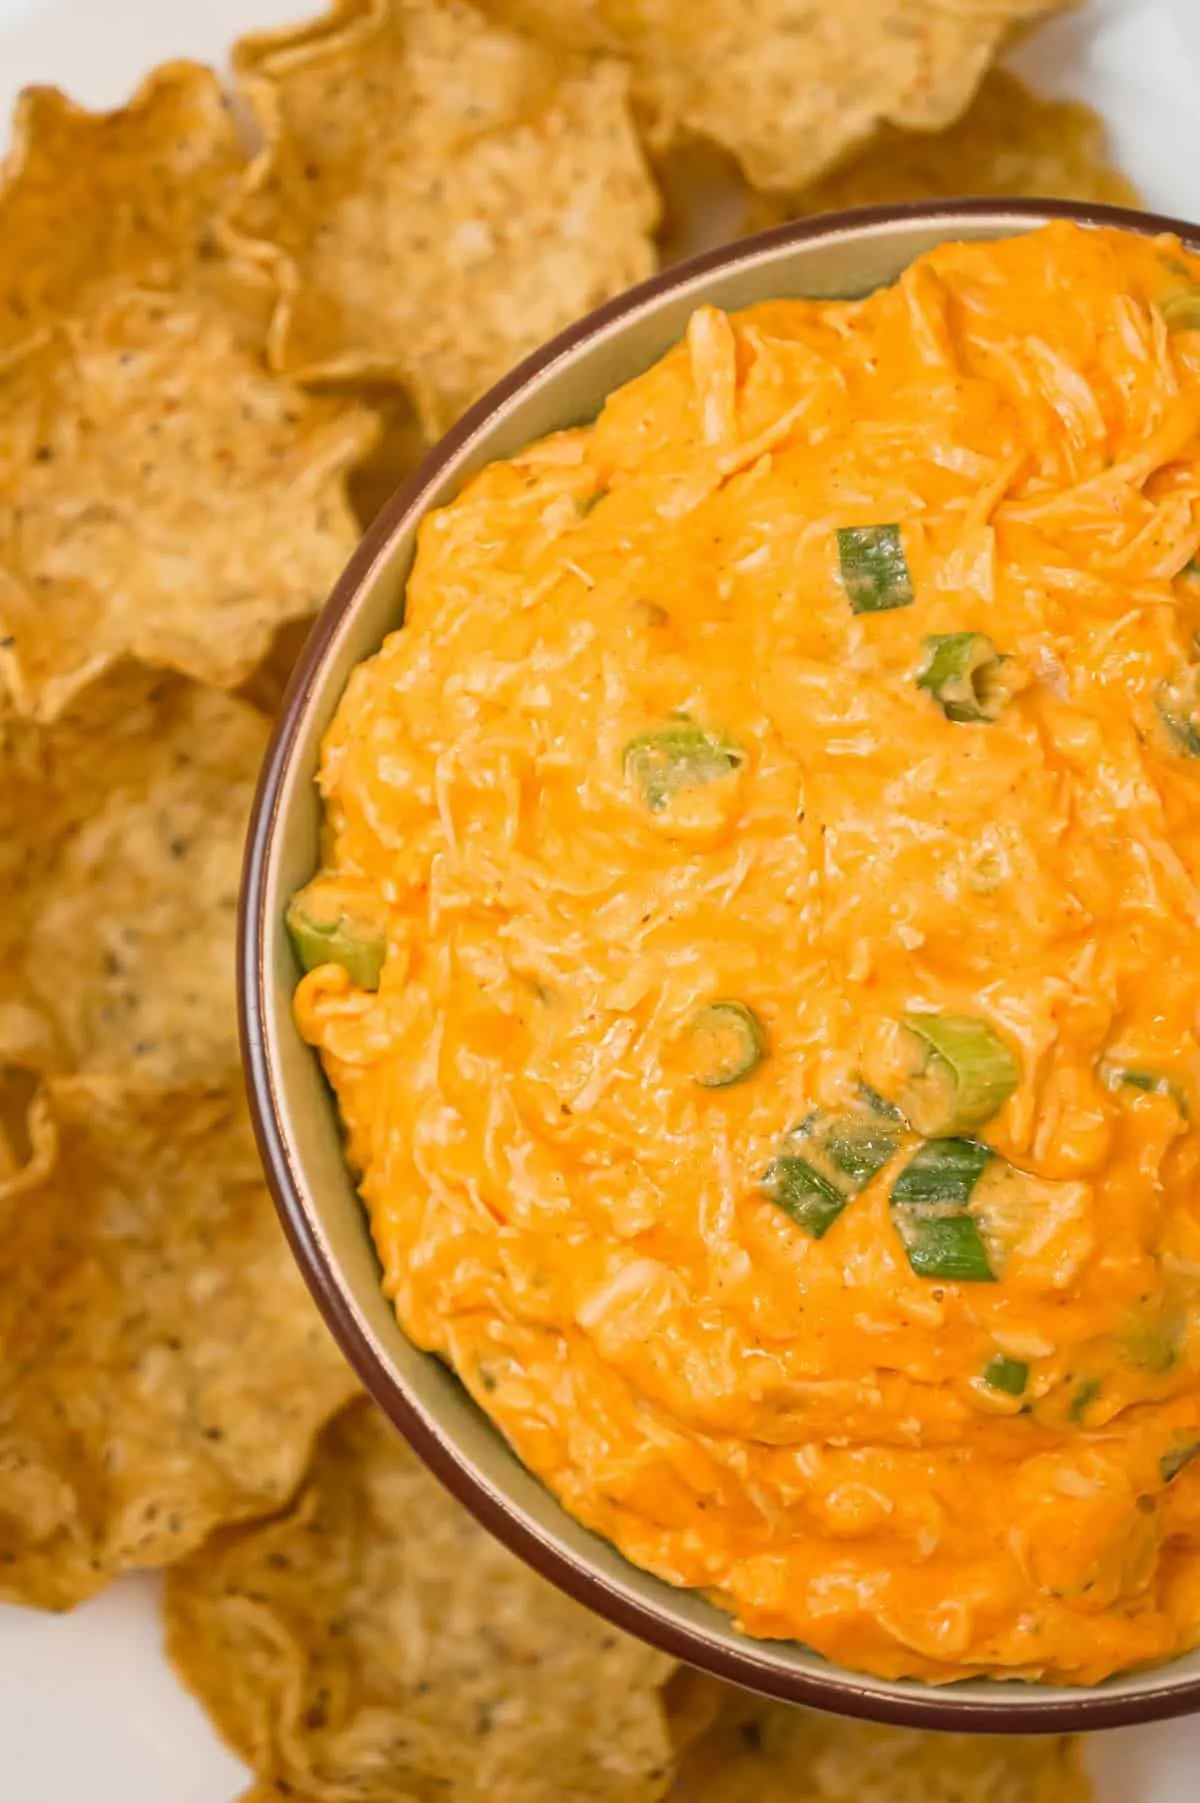 Crock Pot Buffalo Chicken Dip is a delicious hot party dip recipe loaded with shredded chicken, cream cheese, ranch dressing, shredded cheese and Buffalo sauce.